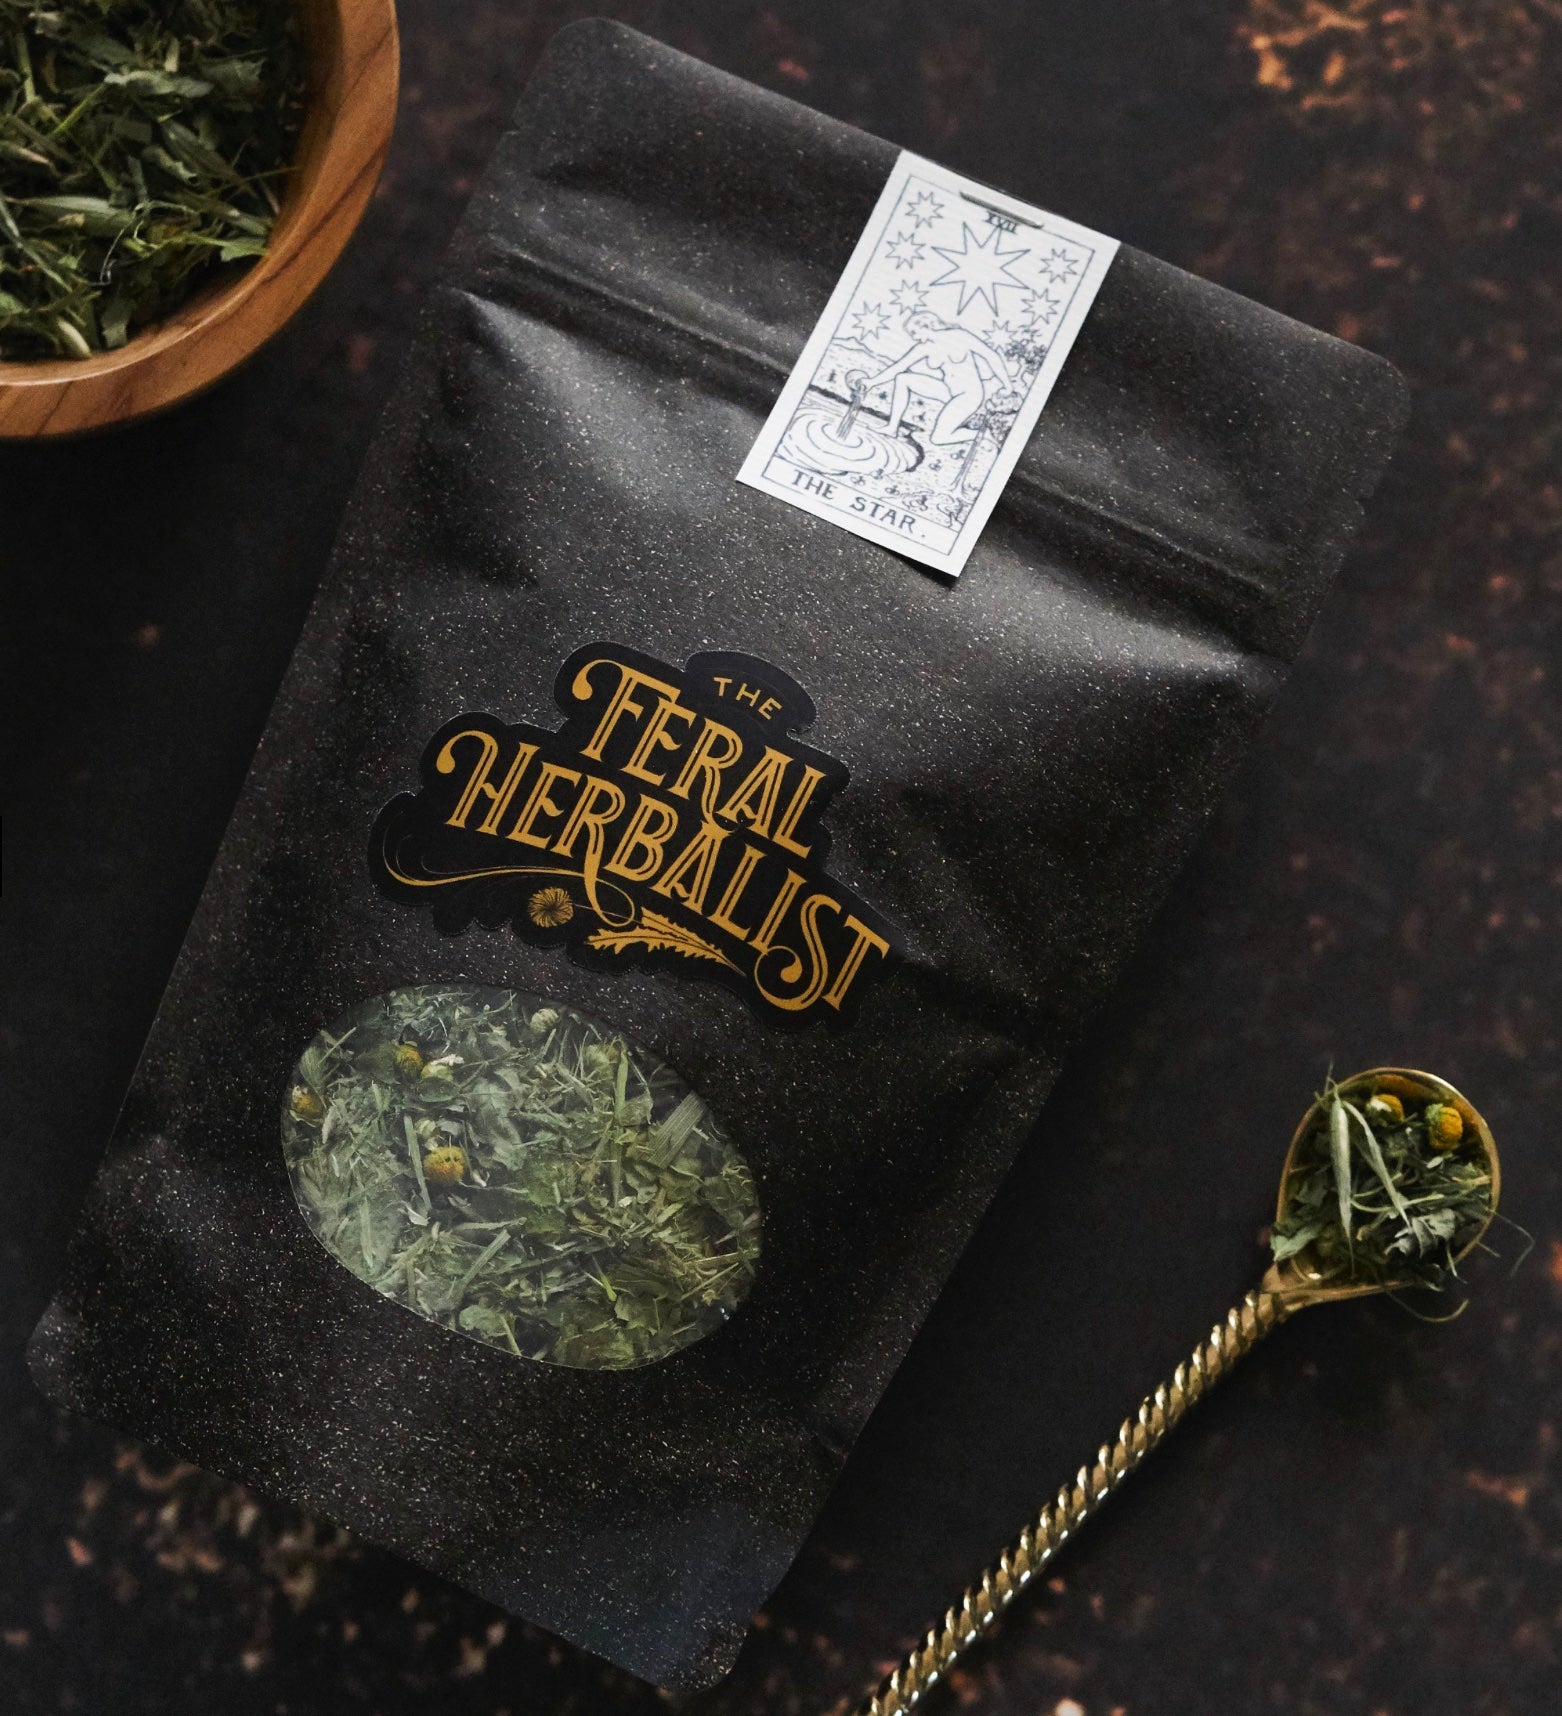 The Star - Herbal Tea by The Feral Herbalist